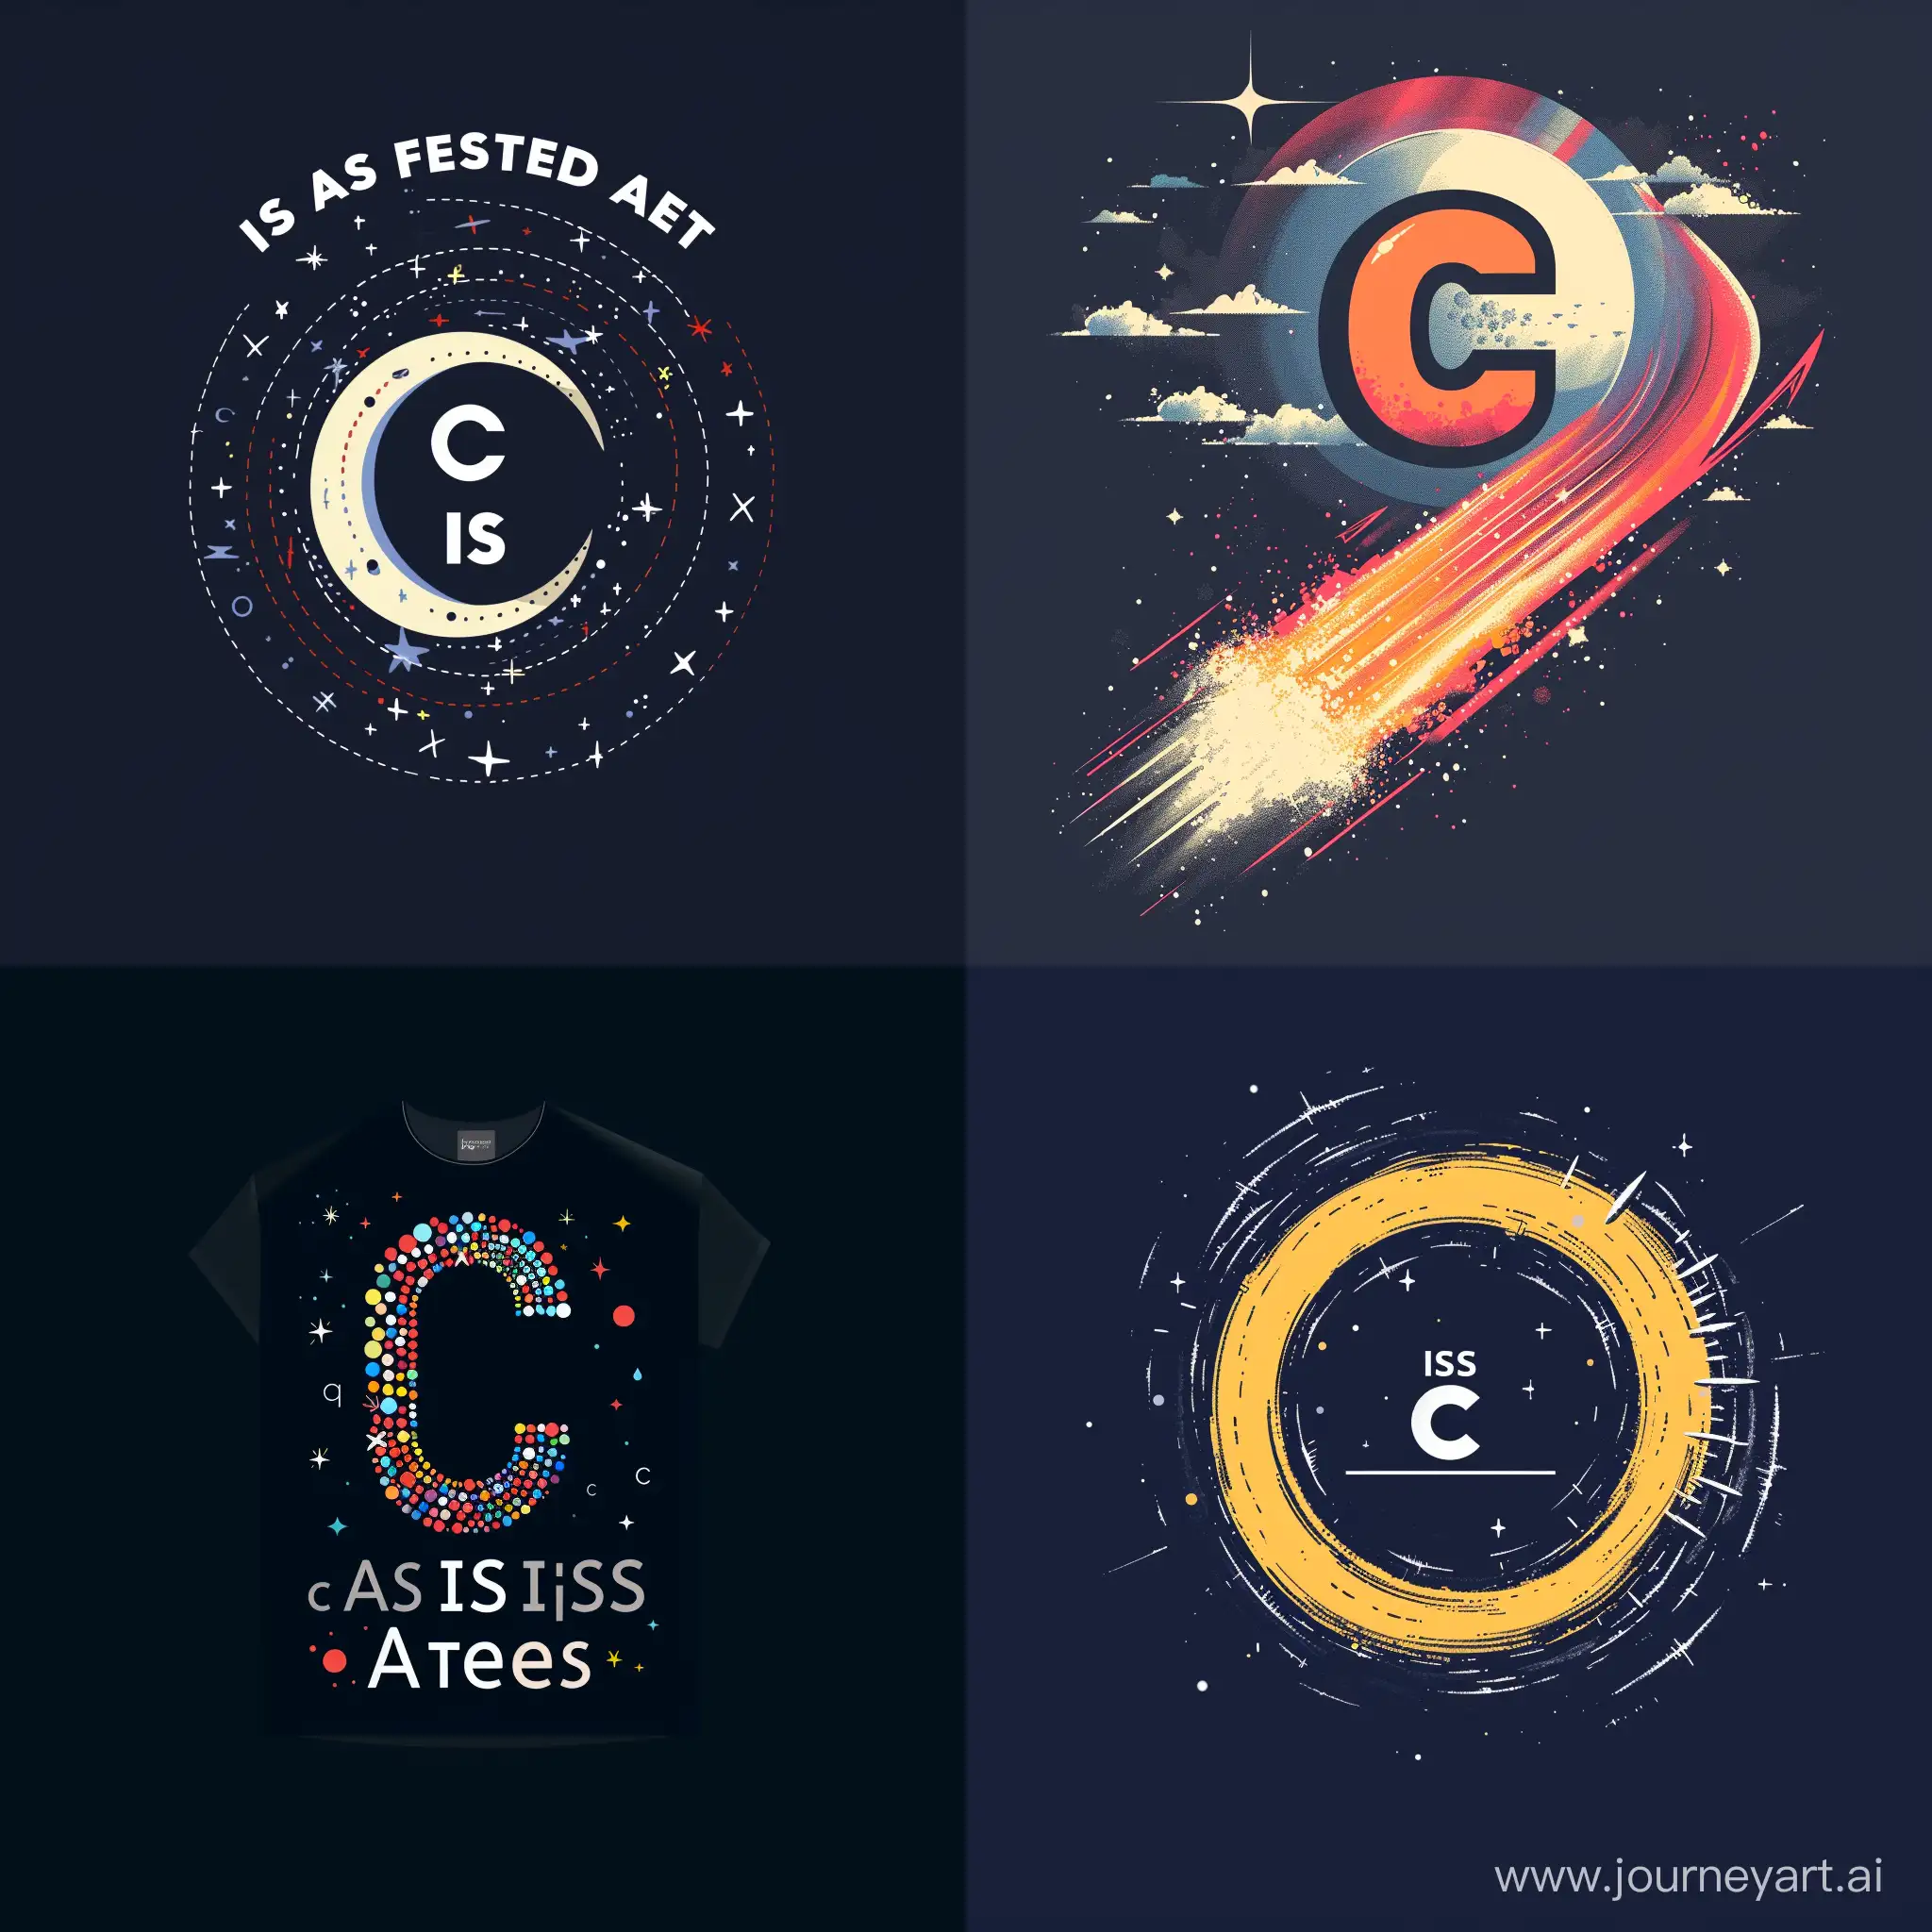 A t shirt design with the text "c is as fast as light"